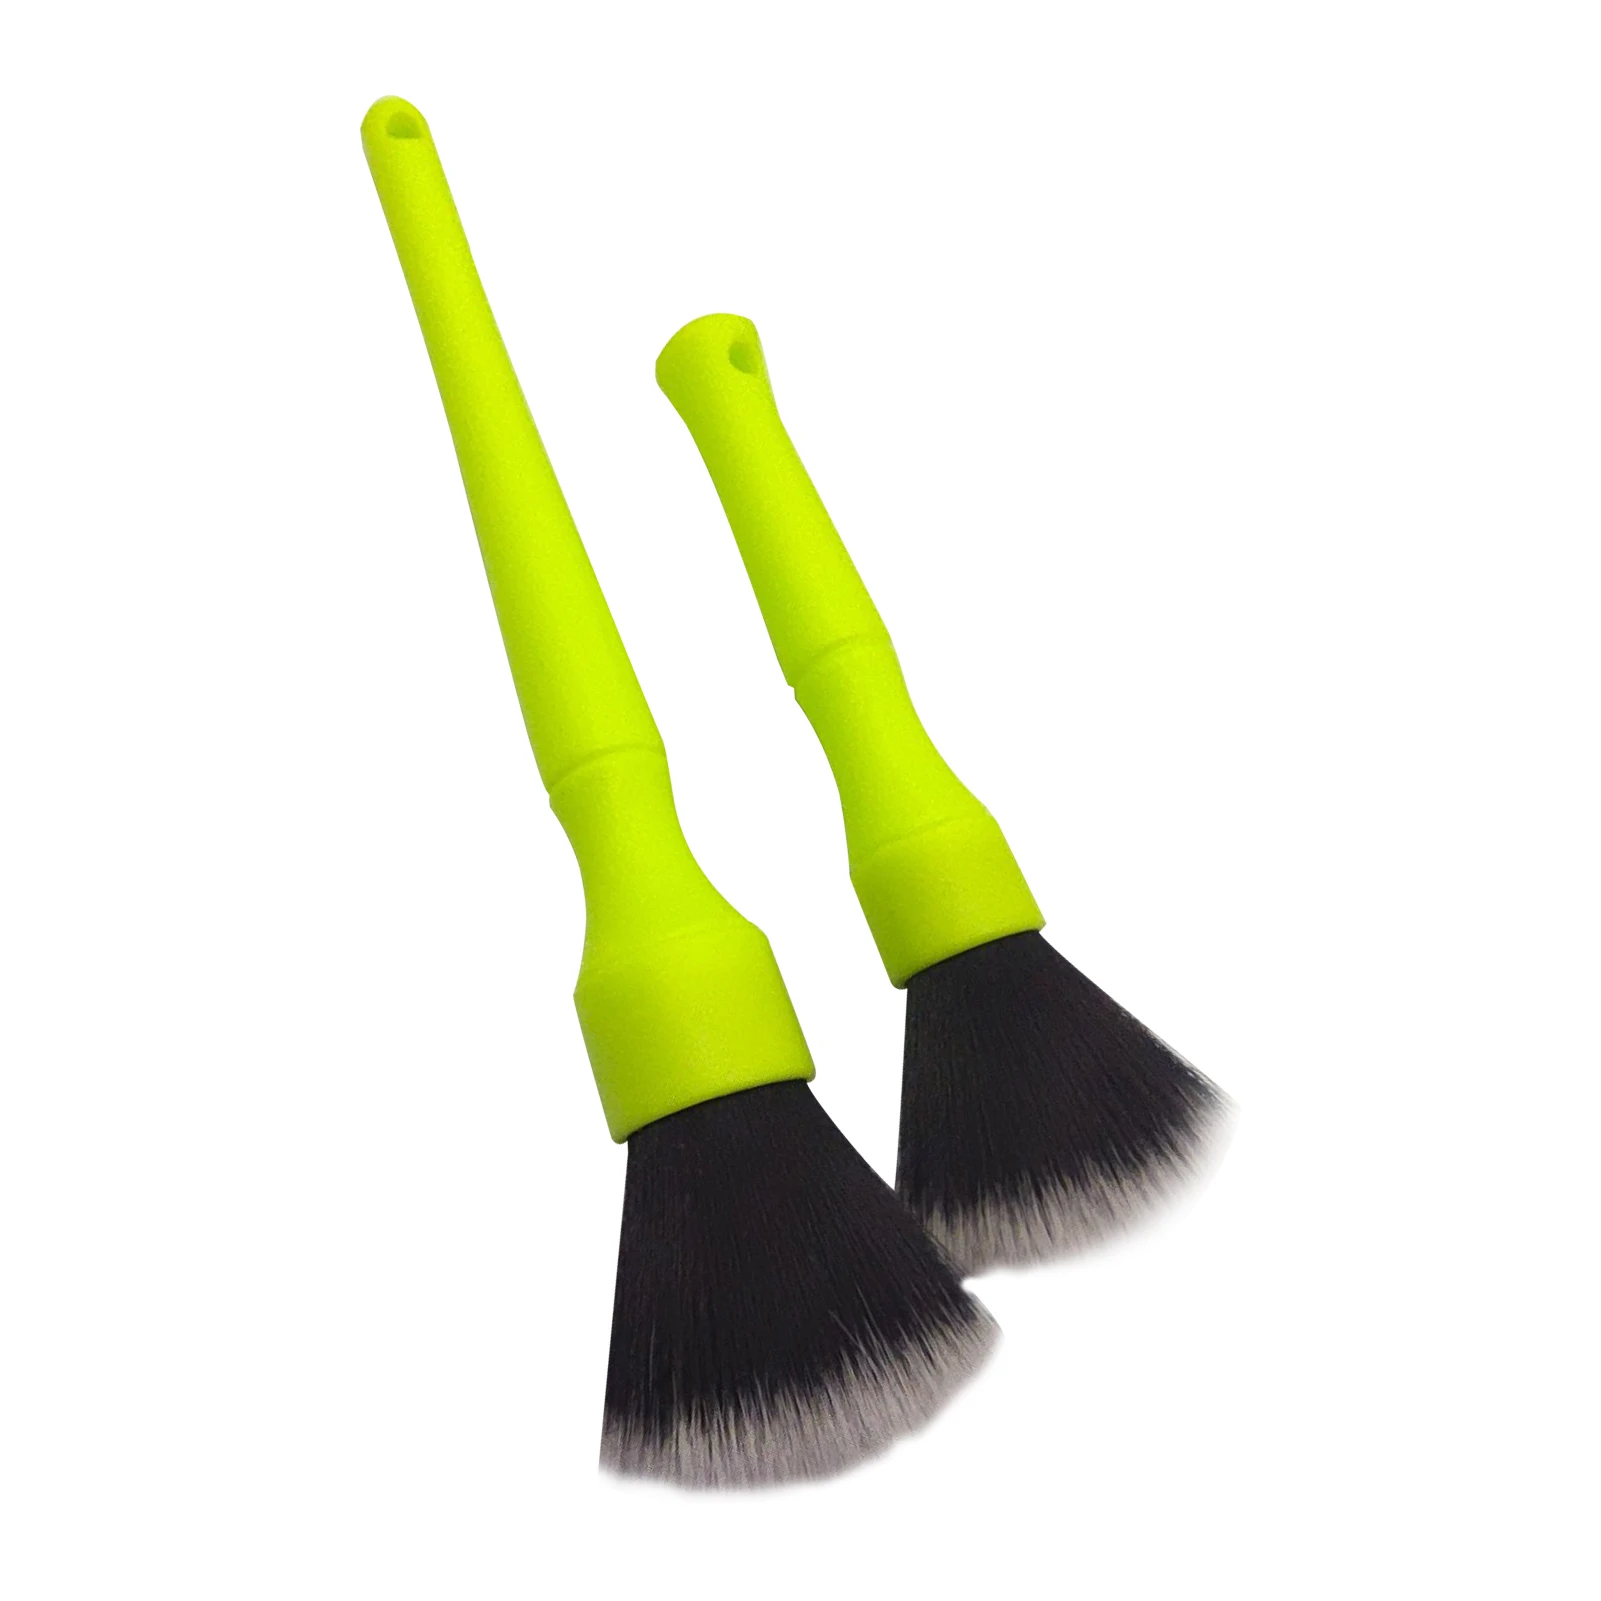 

Auto Cleaning Brushes Smooth Detailing Crevice Brush For Car Care Professional Vehicle Cleaning Tools With A Set Of 2 Perfect